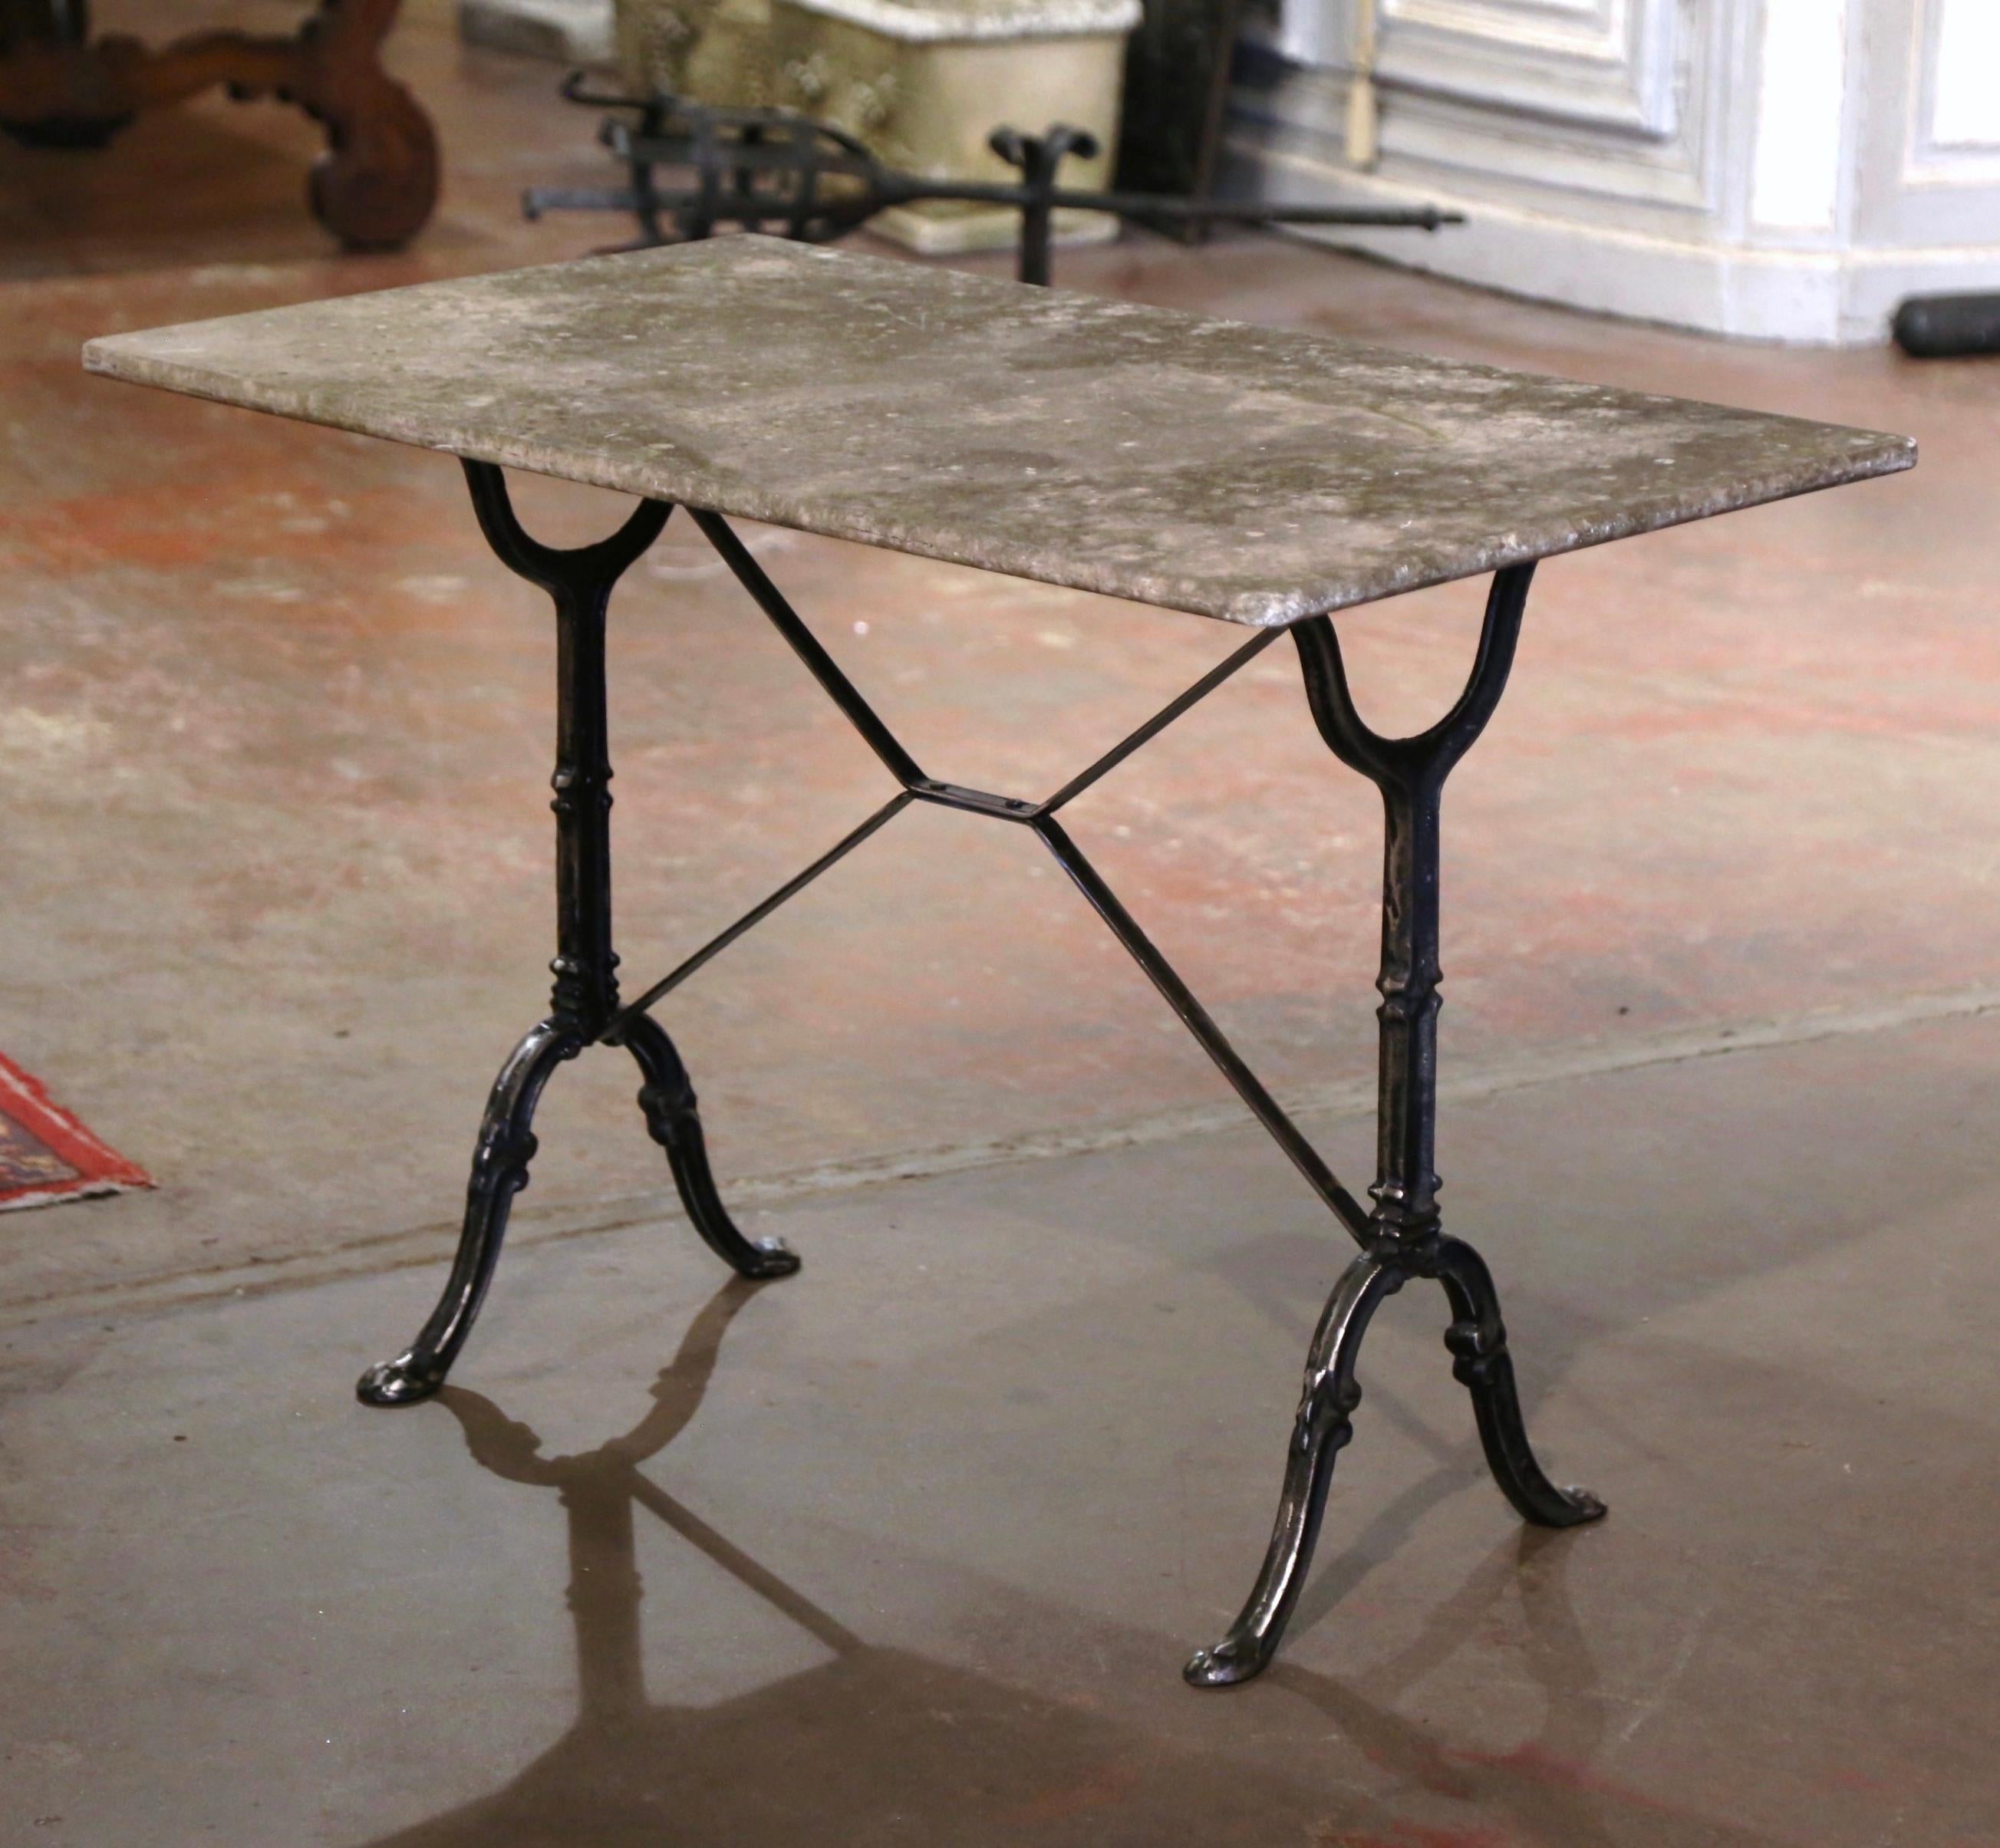 Decorate a patio or covered porch with this elegant antique bistrot table. Crafted in France circa 1920, the cast iron table sits on a trestle base with elegant scroll legs ending with hoof feet, and joined together with a double decorative